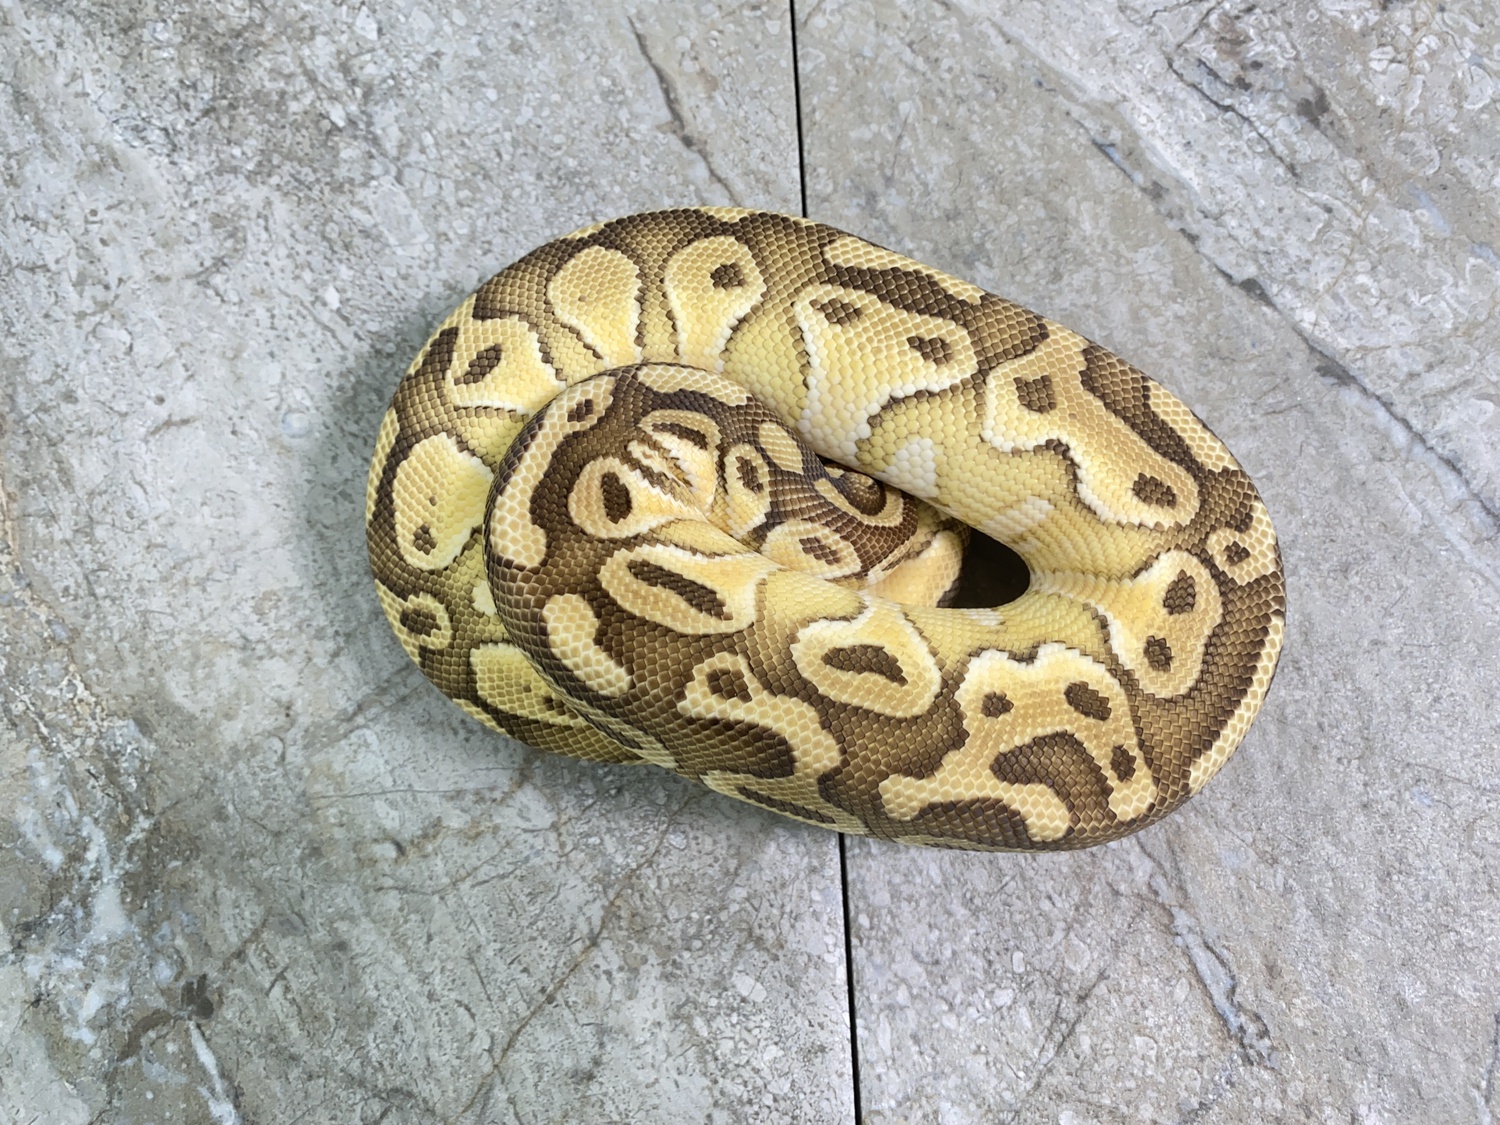 Pastel Lesser Yellowbelly Probable Joppa Ph Tristripe Ball Python by Ectothermic Dungeon